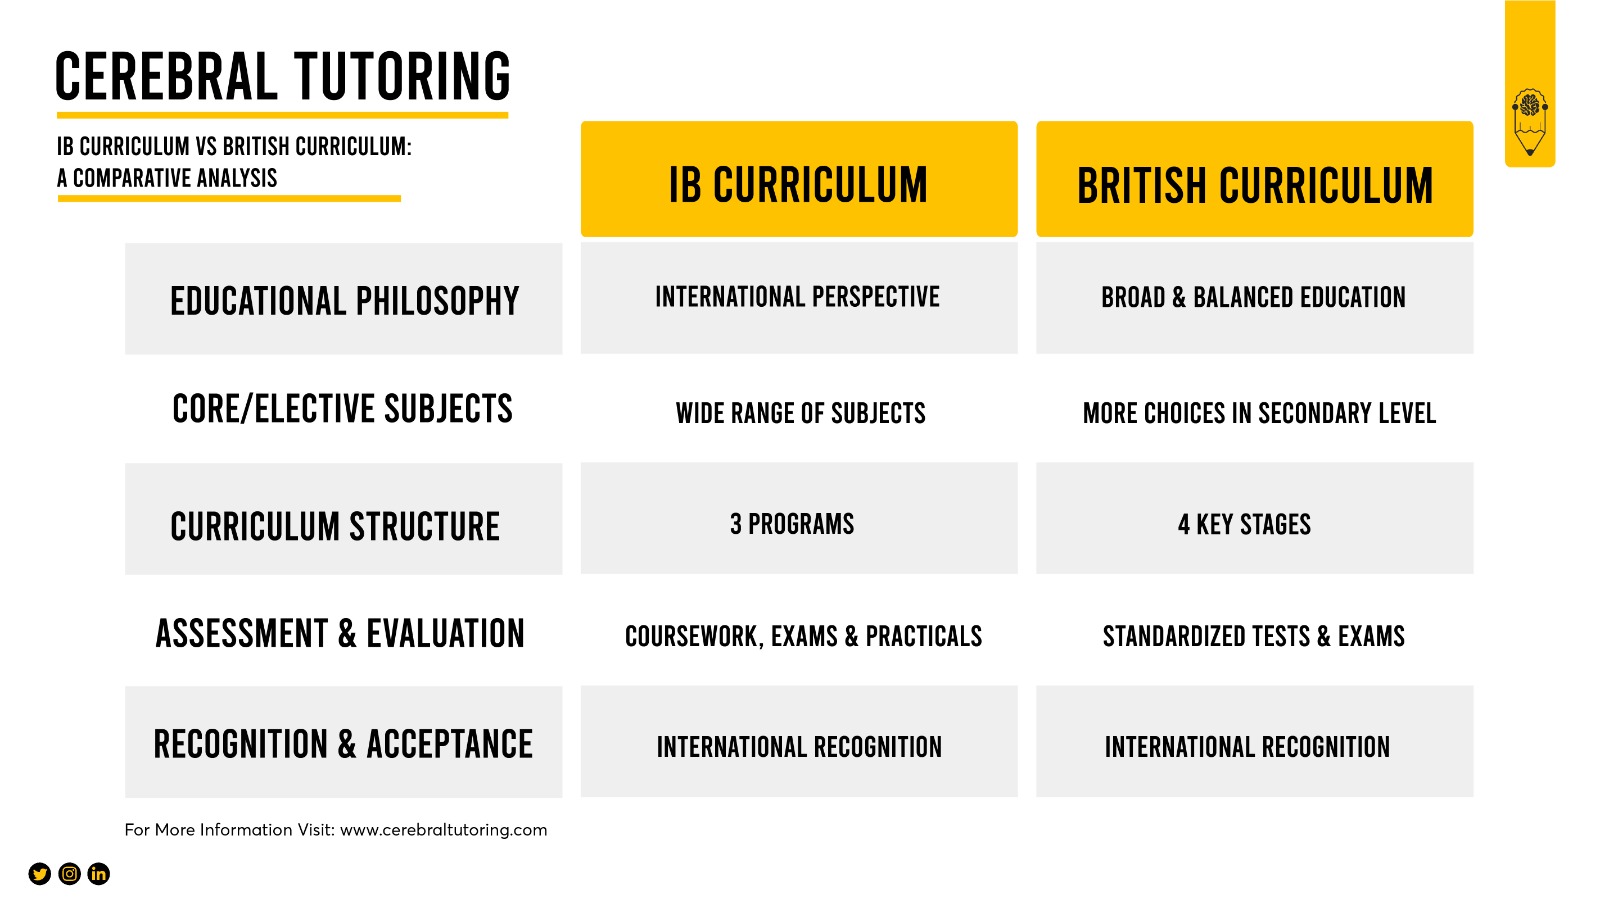 What is better IB or British Curriculum